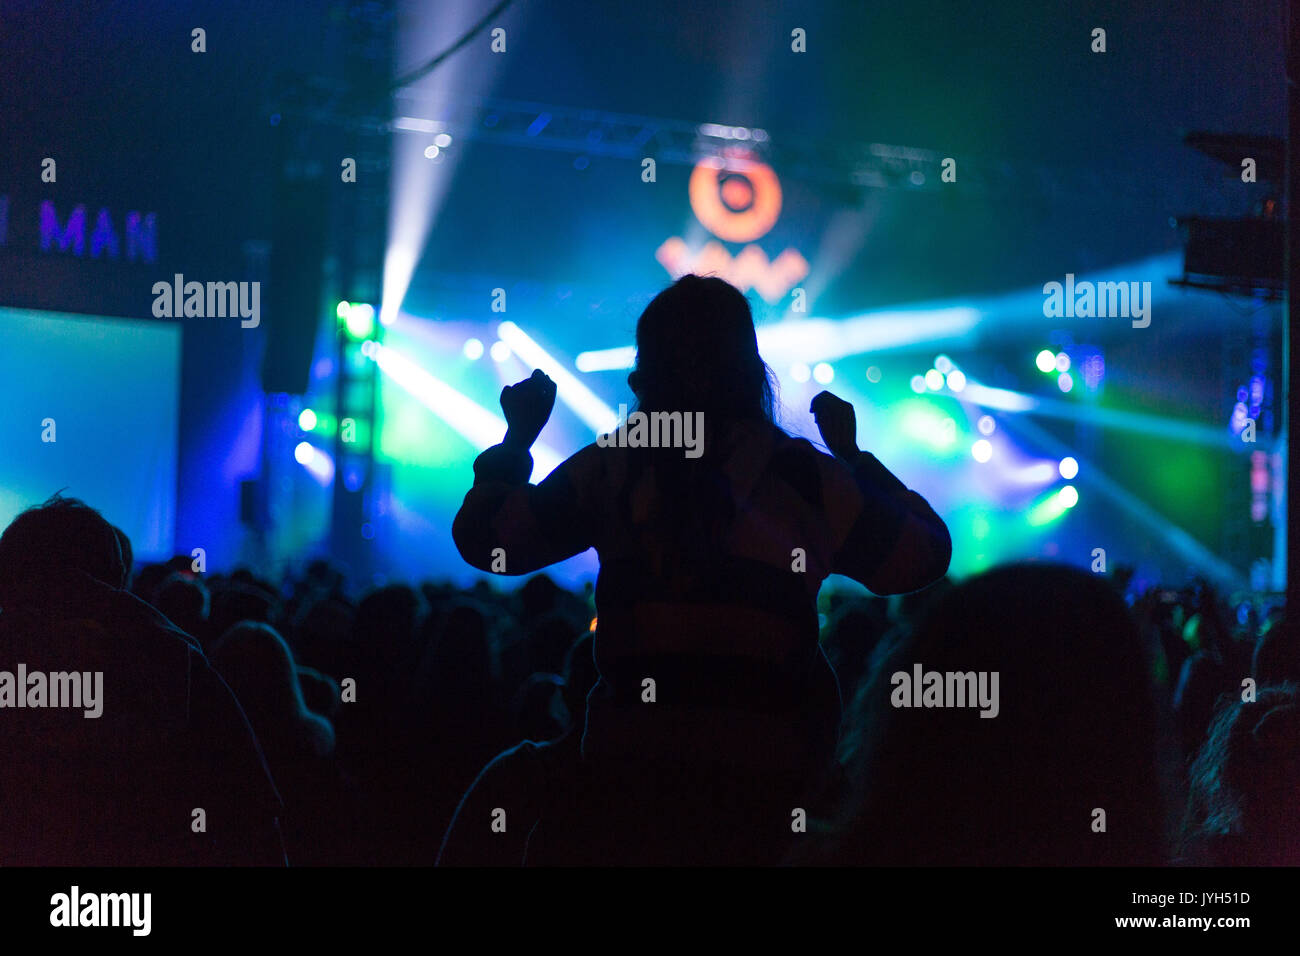 CROWD SCENE DANCING ON SHOULDERS IN SILHOUETTE: People dance wildly on one another's shoulders in silhouette in stage lighting as the crowd in the Far Out Tent during the LIARS set on Day Two of the Green Man music festival in Glanusk Park, Brecon, Wales on 19th August 2017. Credit: Rob Watkins/Alamy Live News Stock Photo